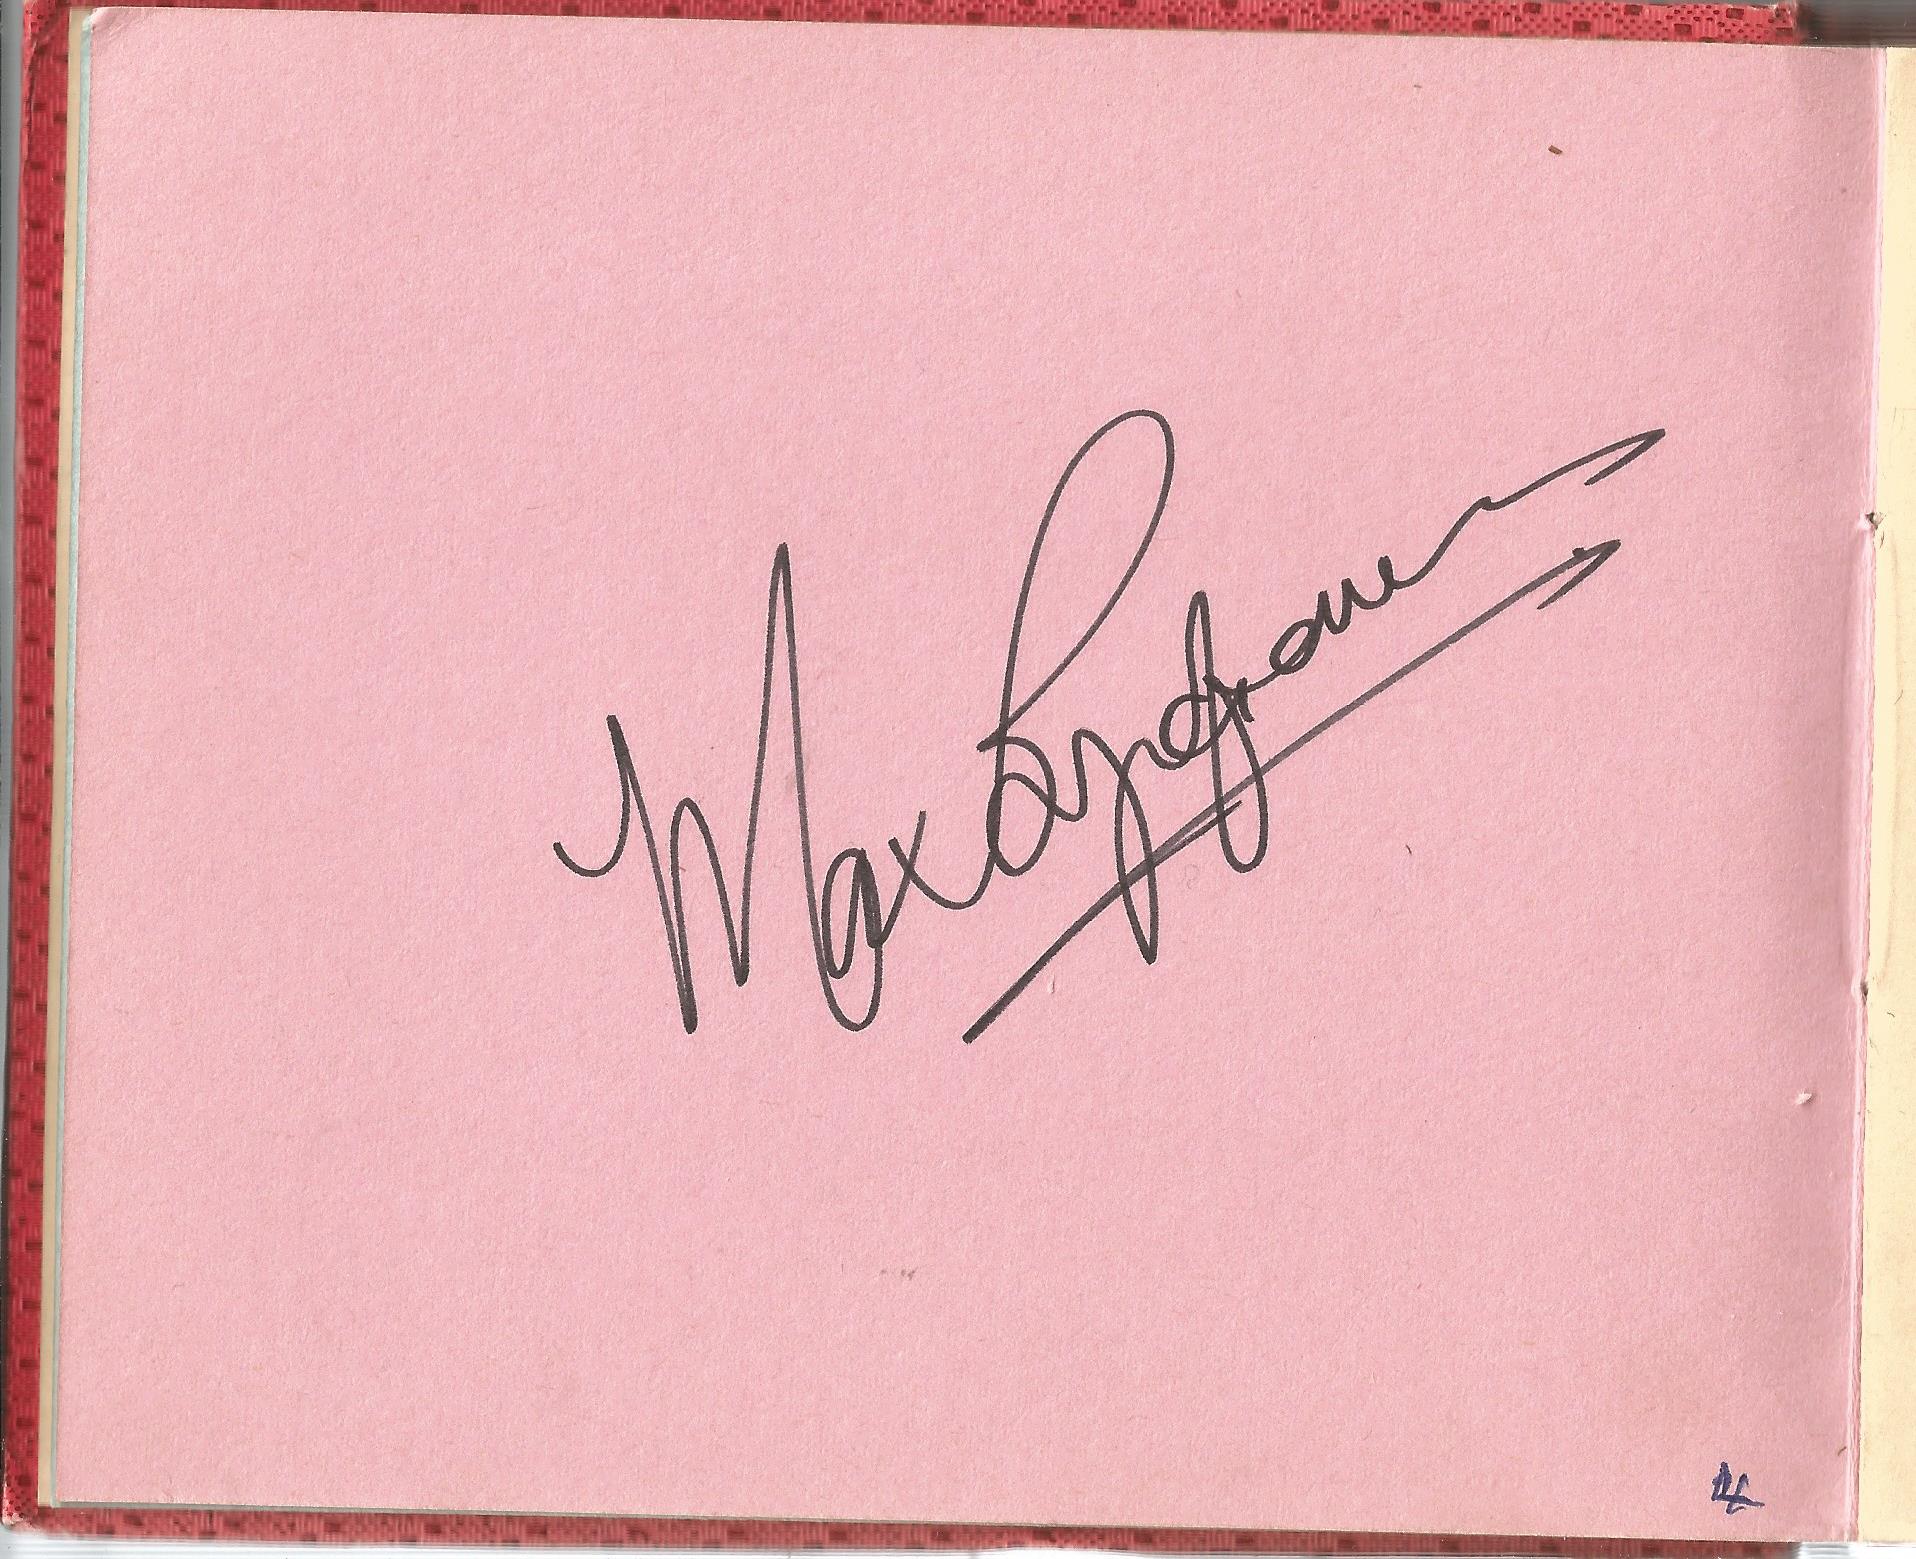 1970 celebrity autograph book. Contains Bruce Forsyth, Kenny Lynch, George Will, John Garner, - Image 3 of 3